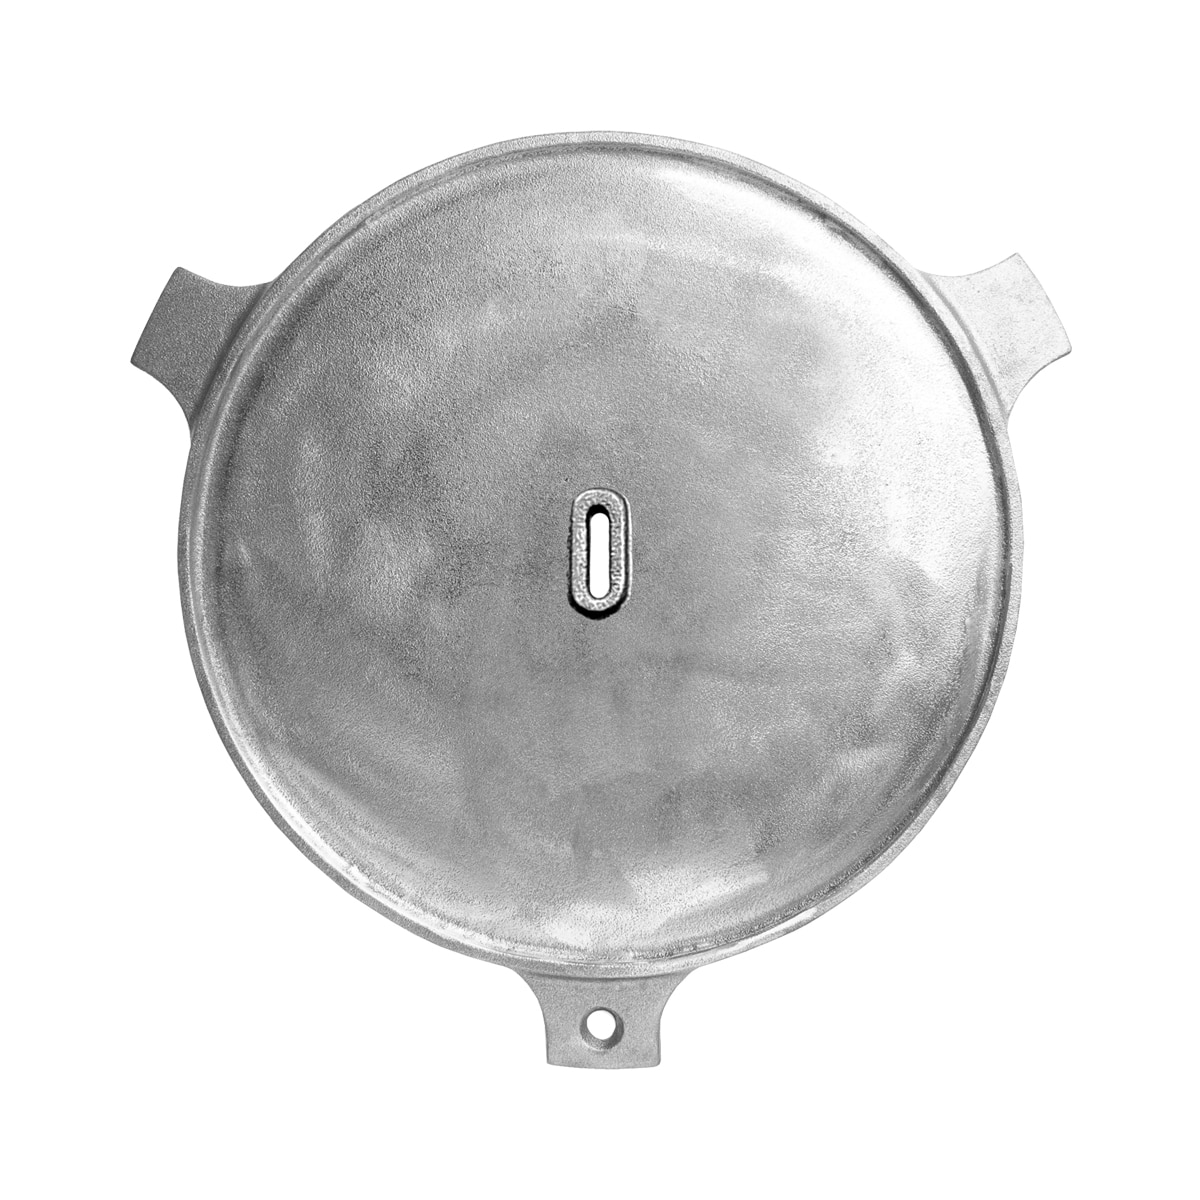 Goldens' Cast Iron 20.5" Searing Plate